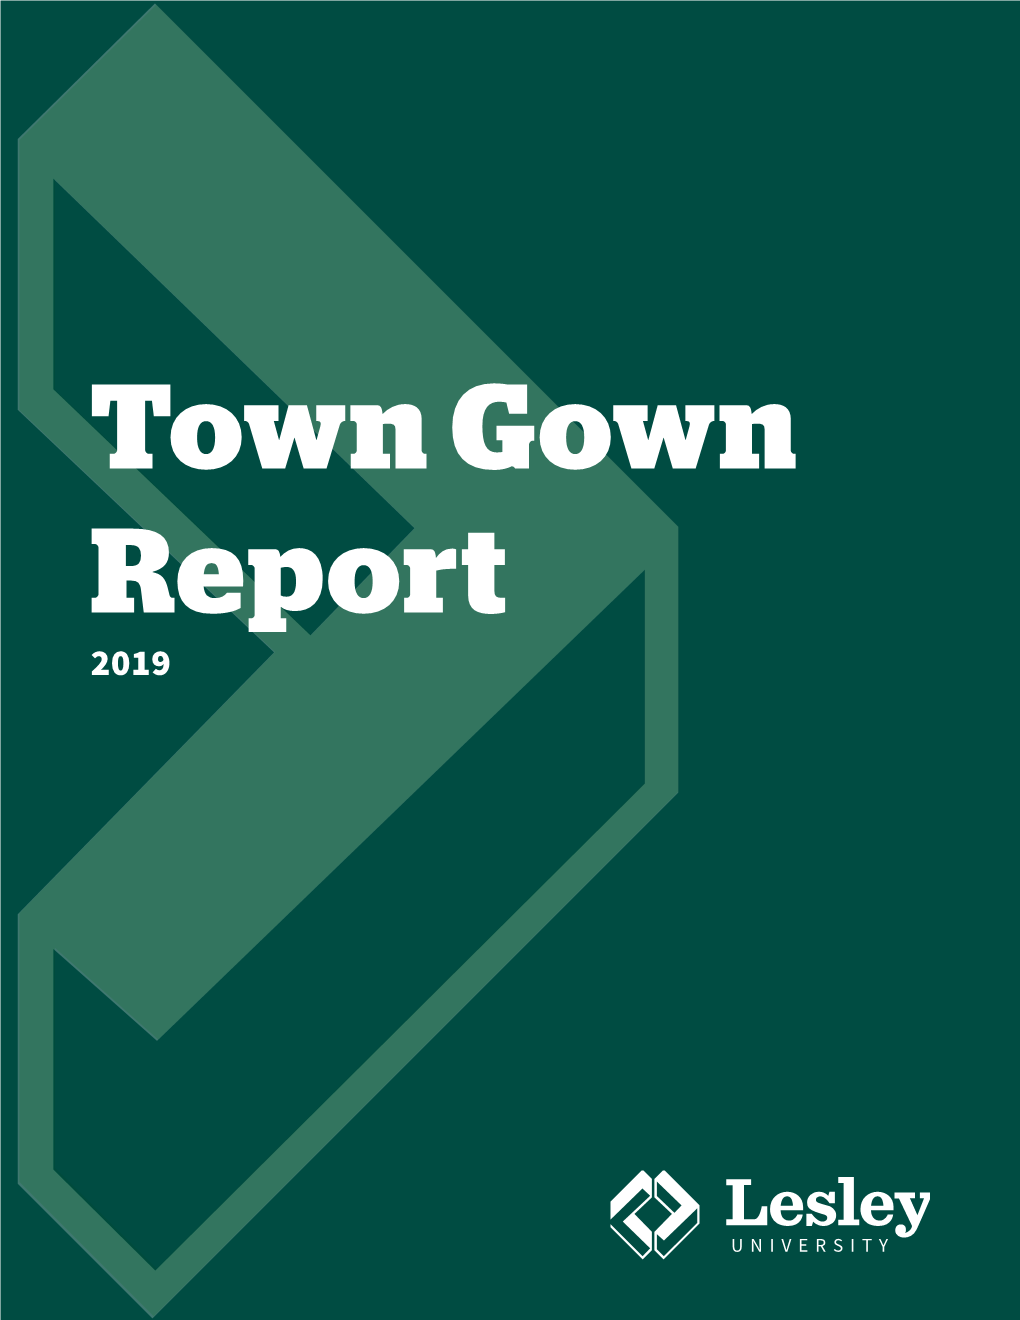 2019 Lesley University Town Gown Report